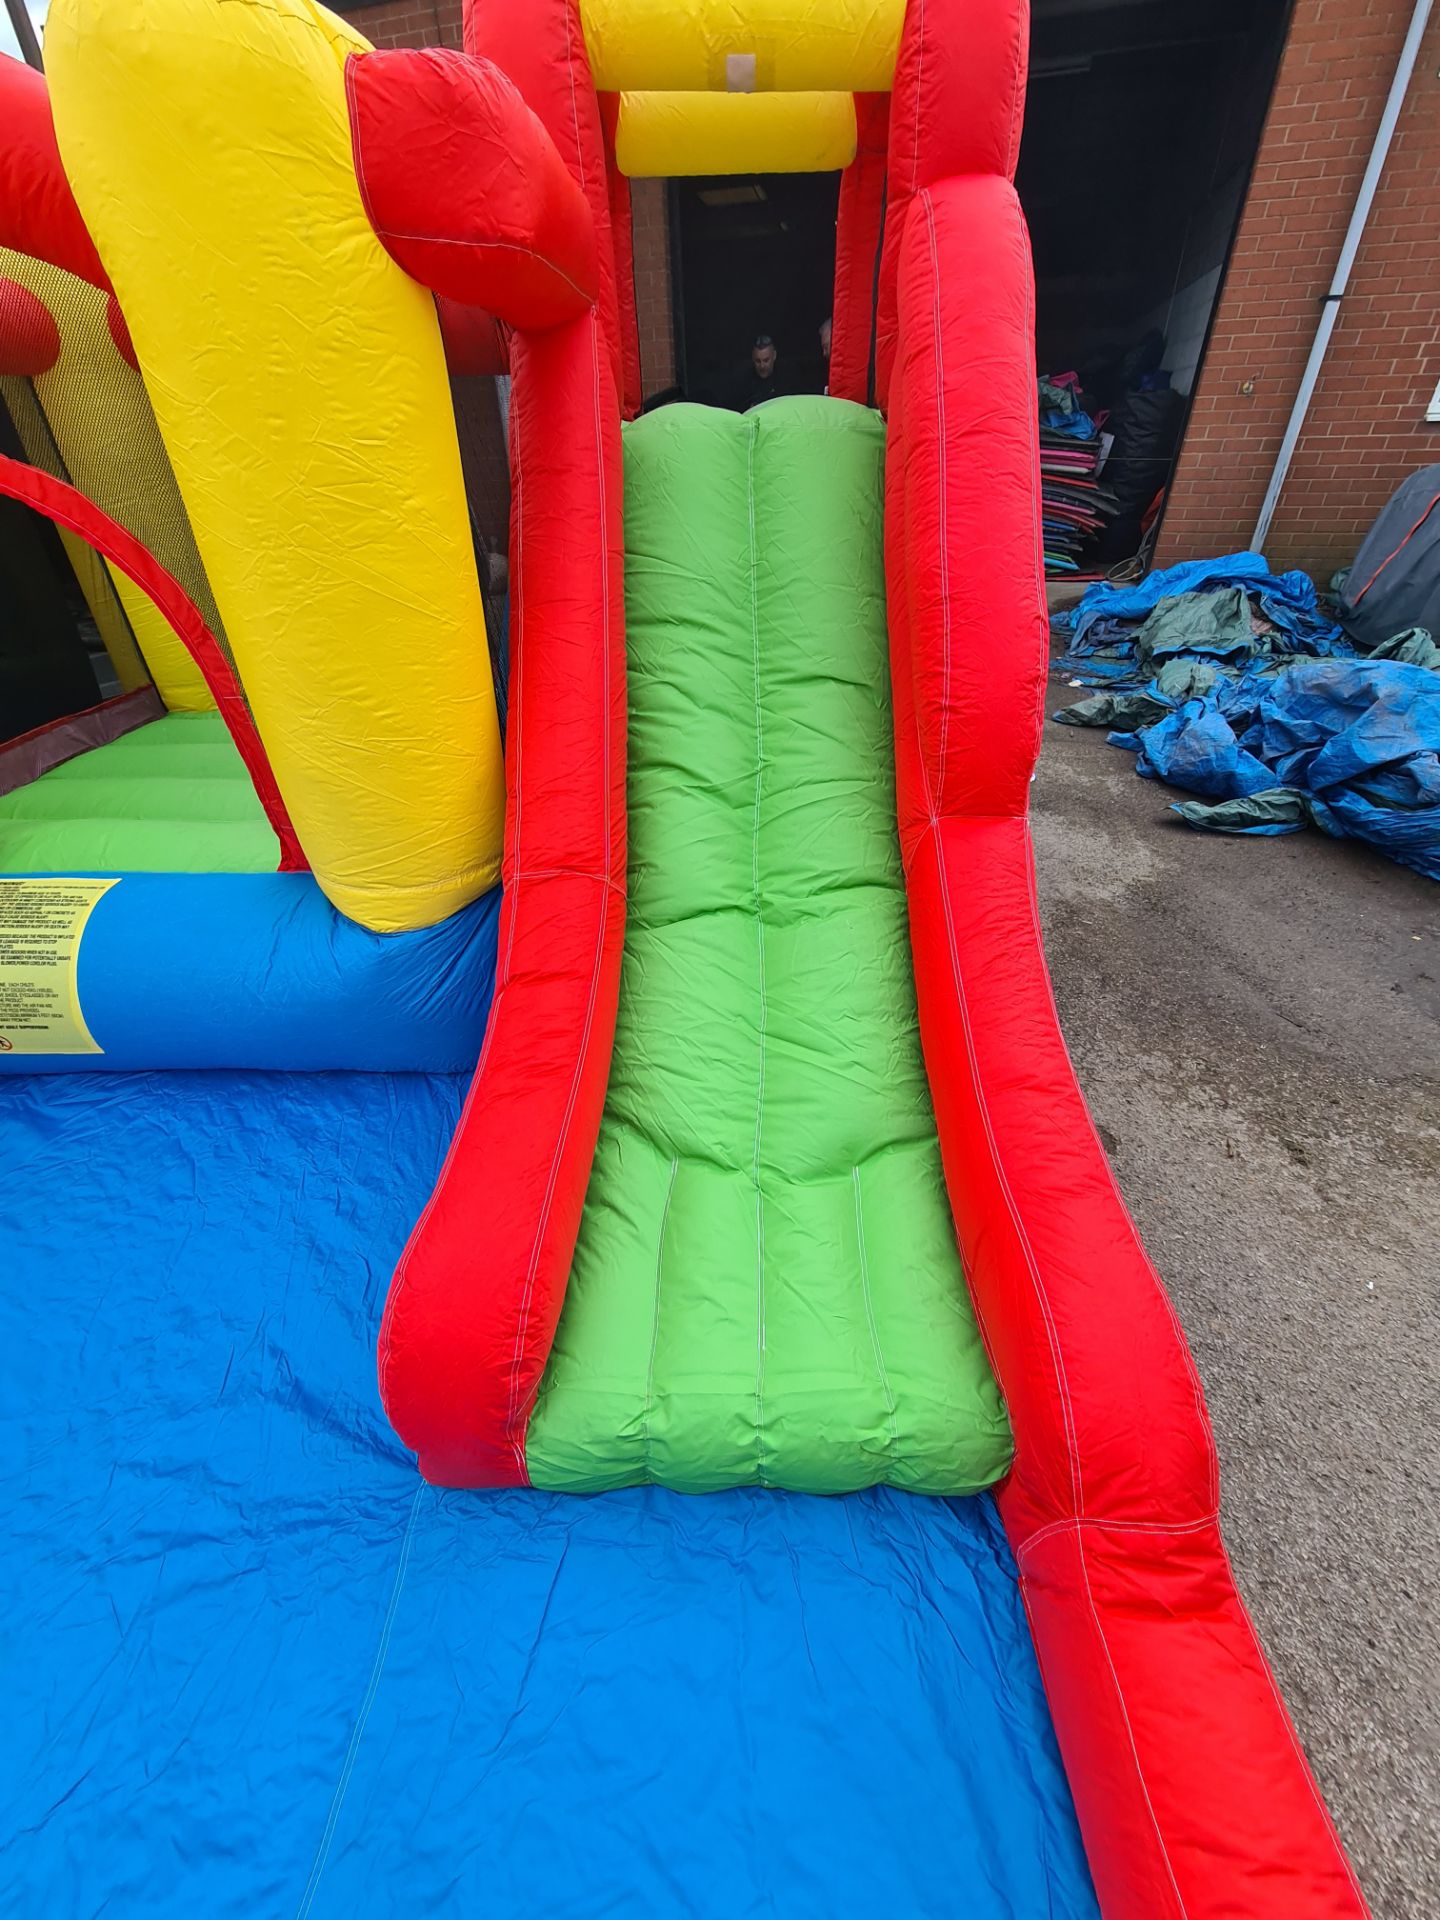 3 X BRAND NEW - KIDS BLOW-UP WET & DRY BOUNCY PLAY AREA - NEW - Image 8 of 14